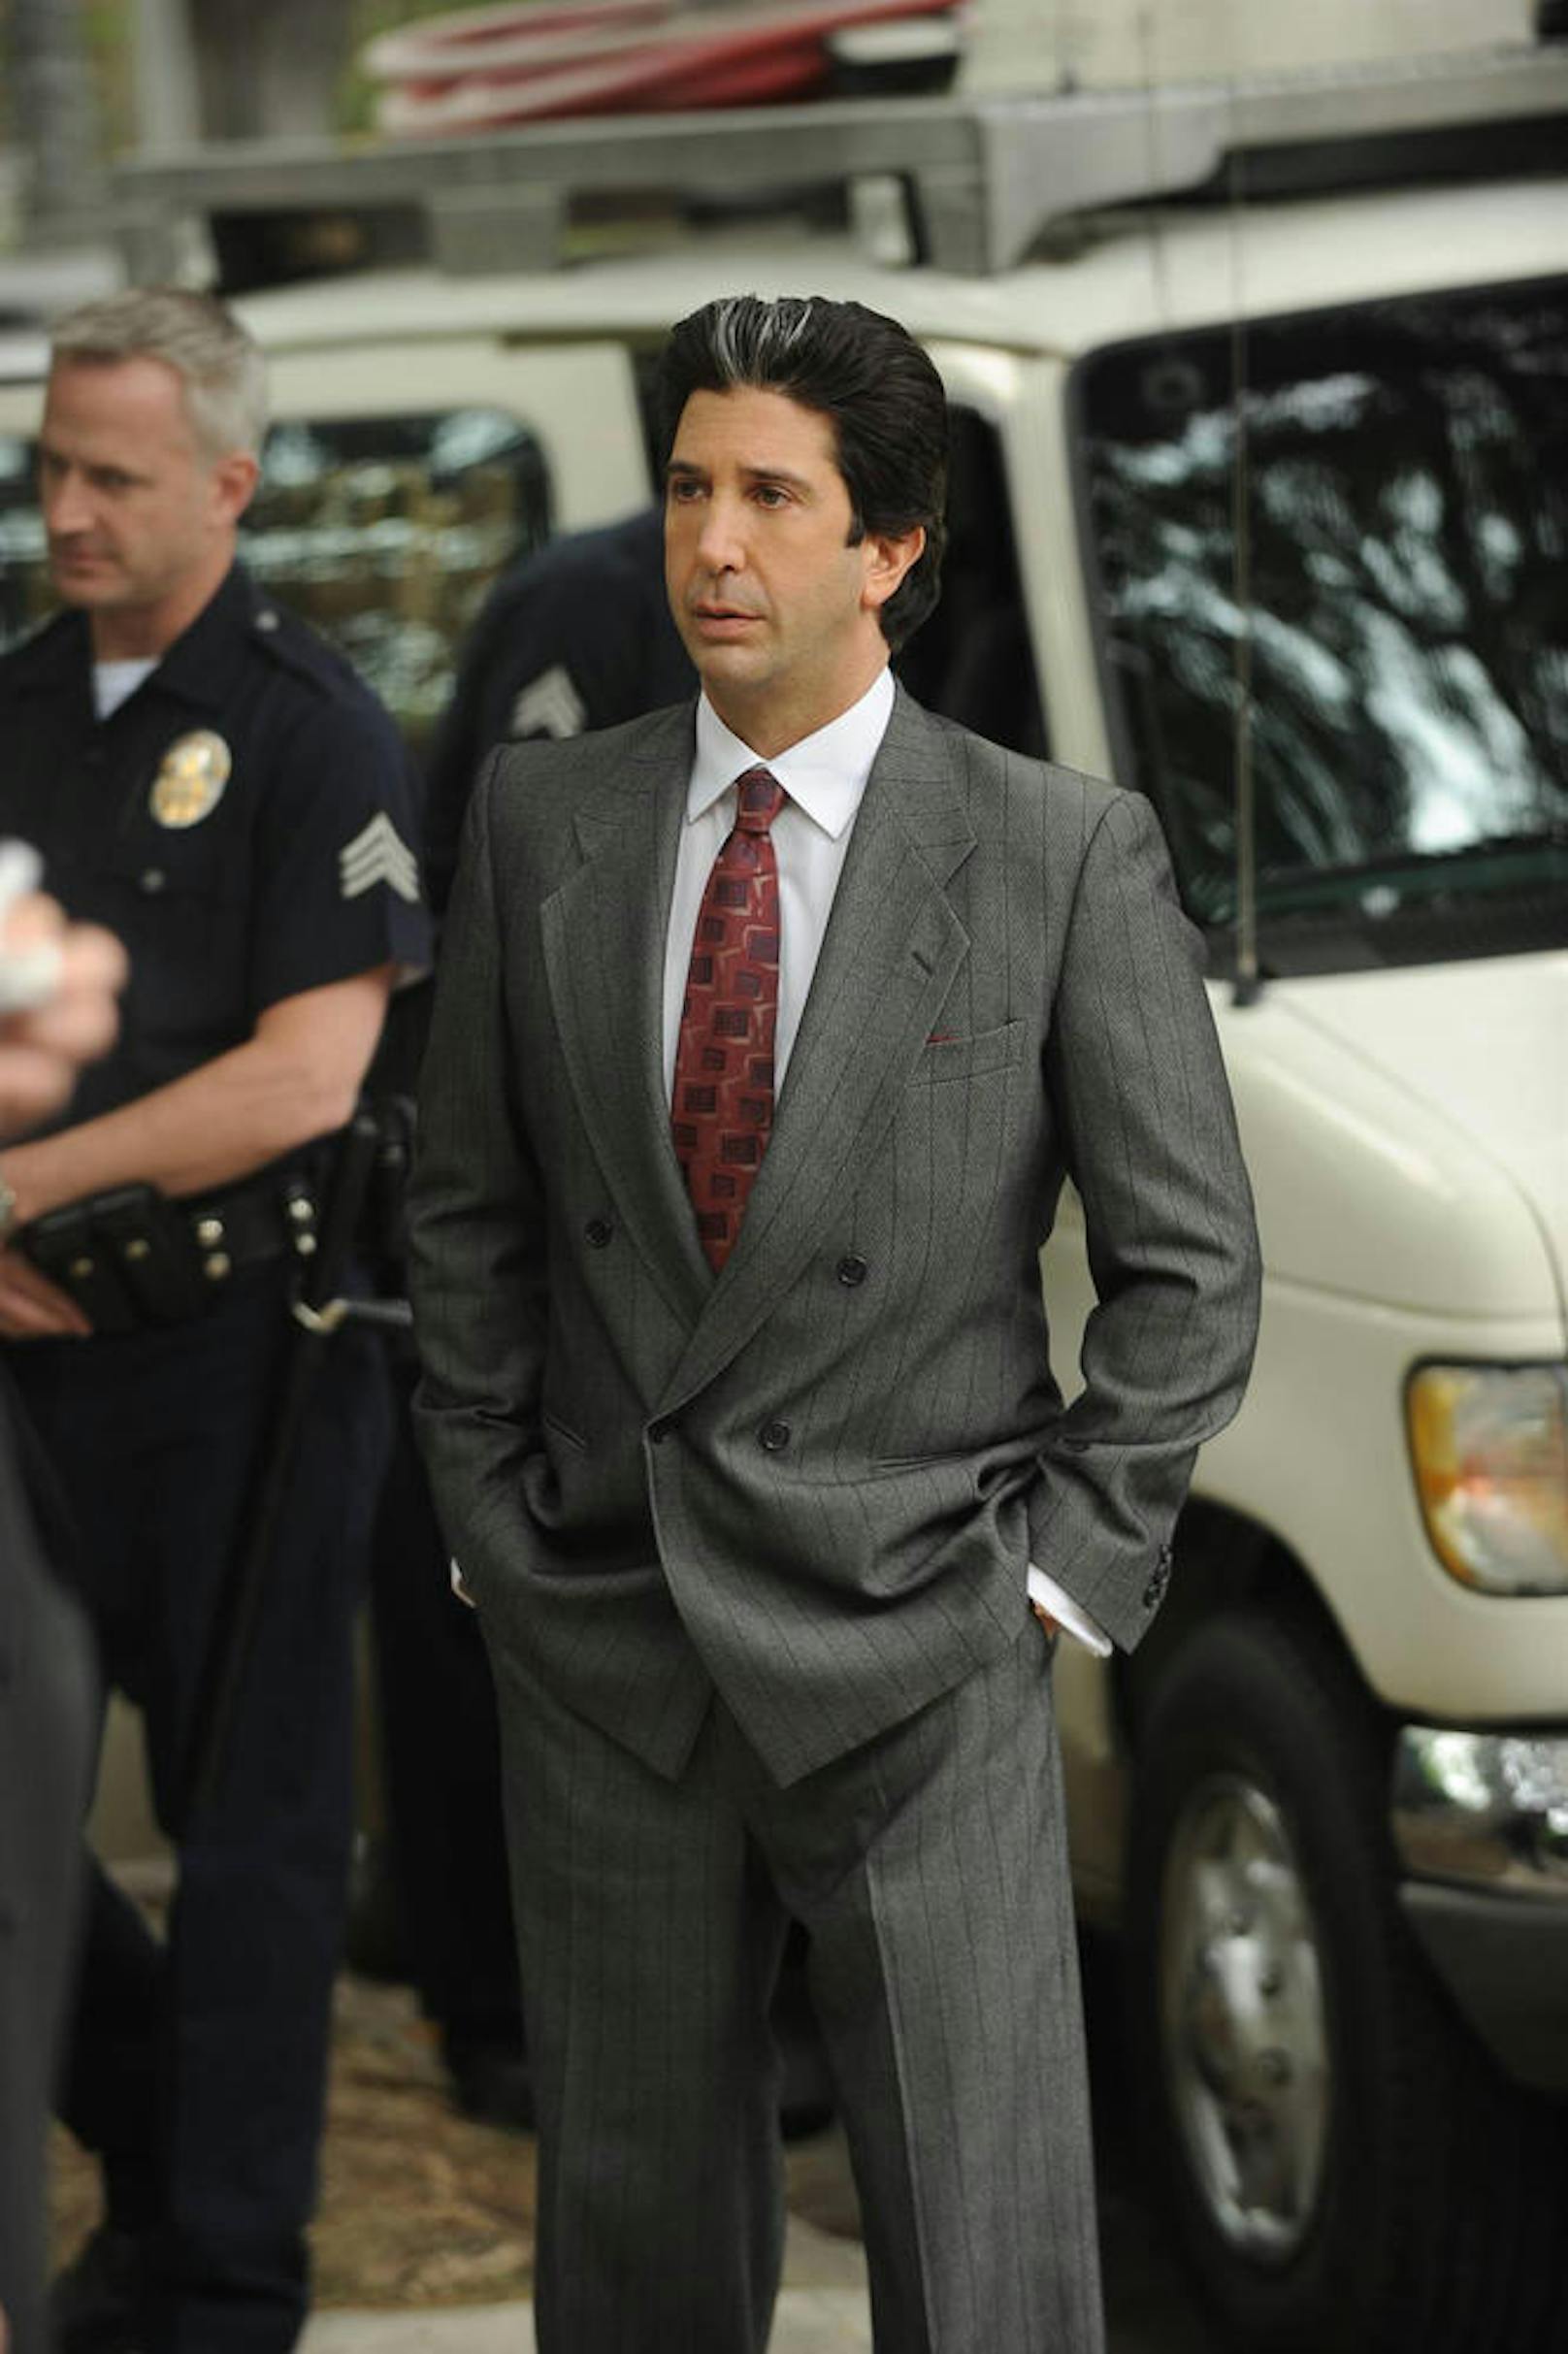 David Schwimmer in "American Crime Story: The People v. O.J. Simpson"